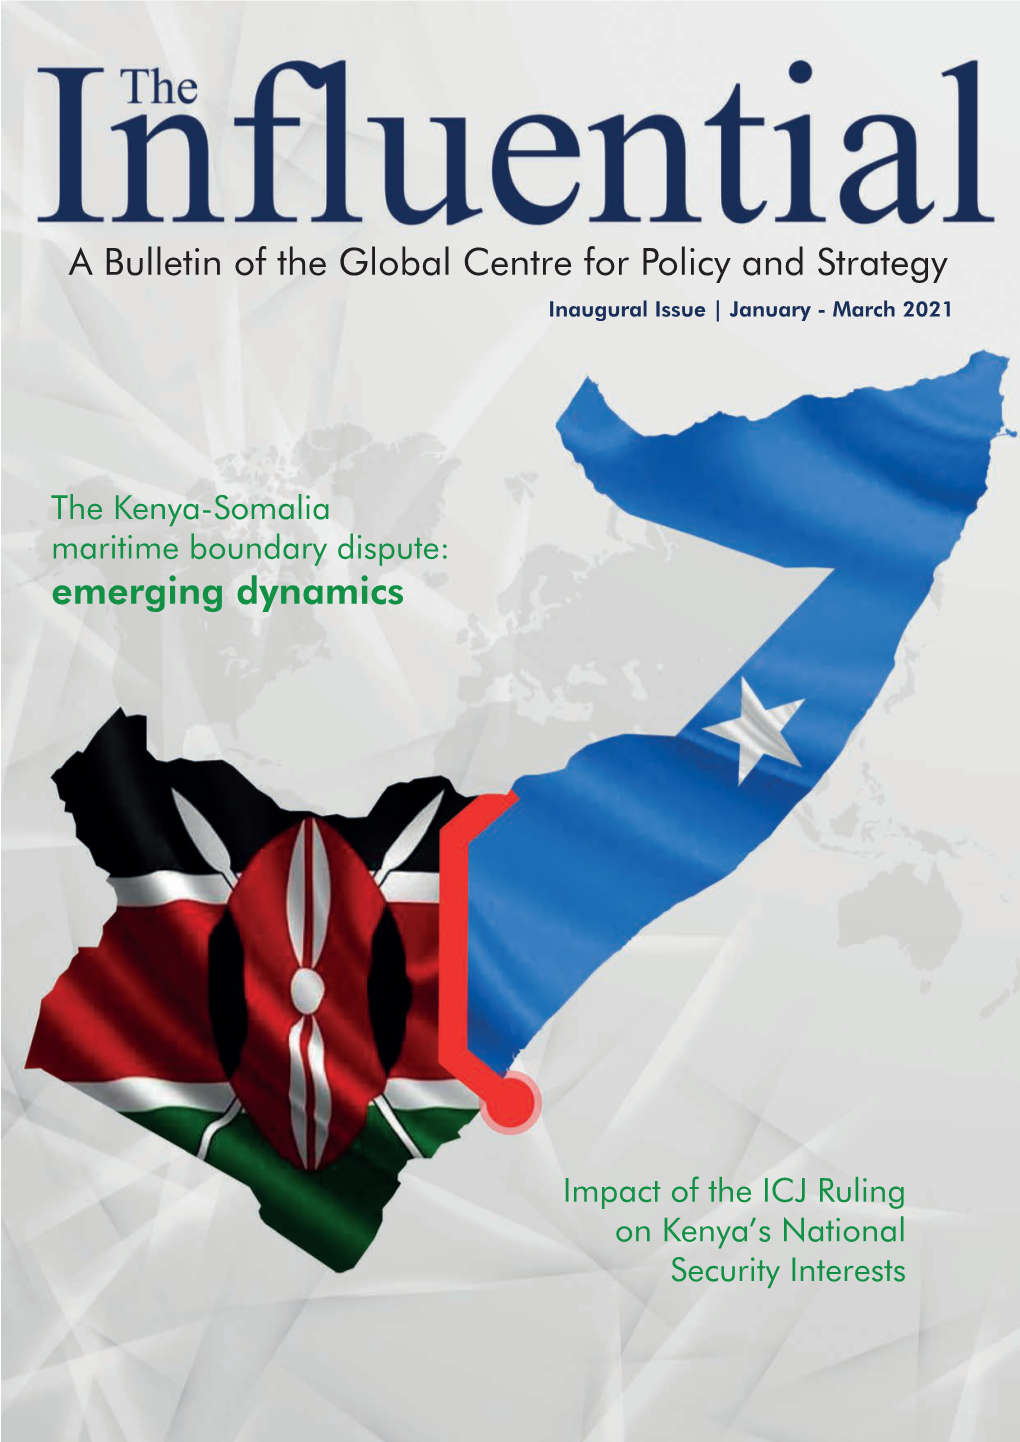 A Bulletin of the Global Centre for Policy and Strategy